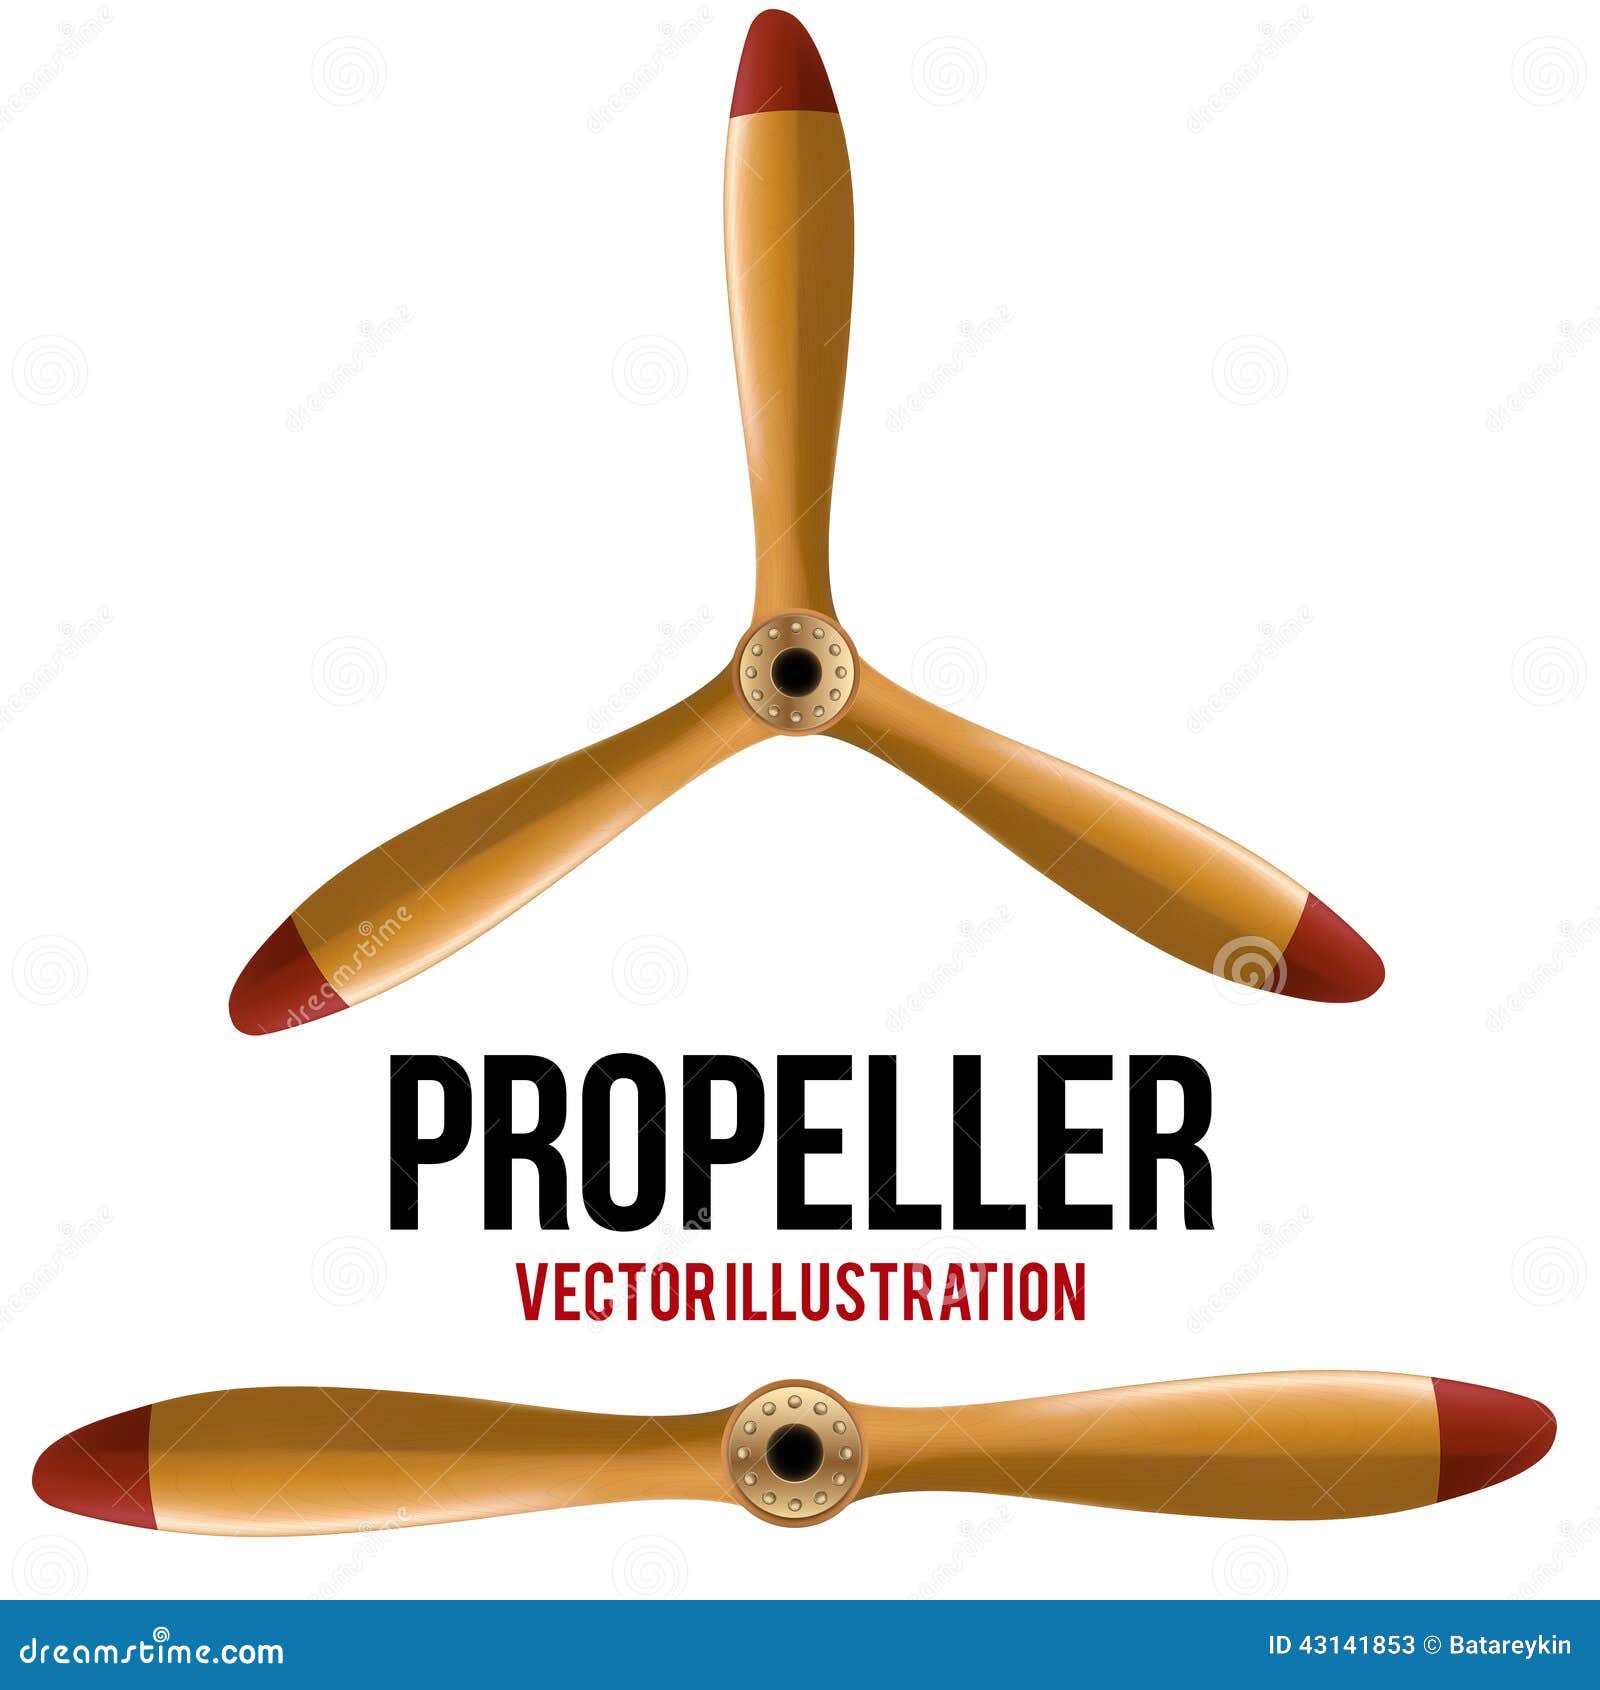 boat propeller clipart free - photo #43